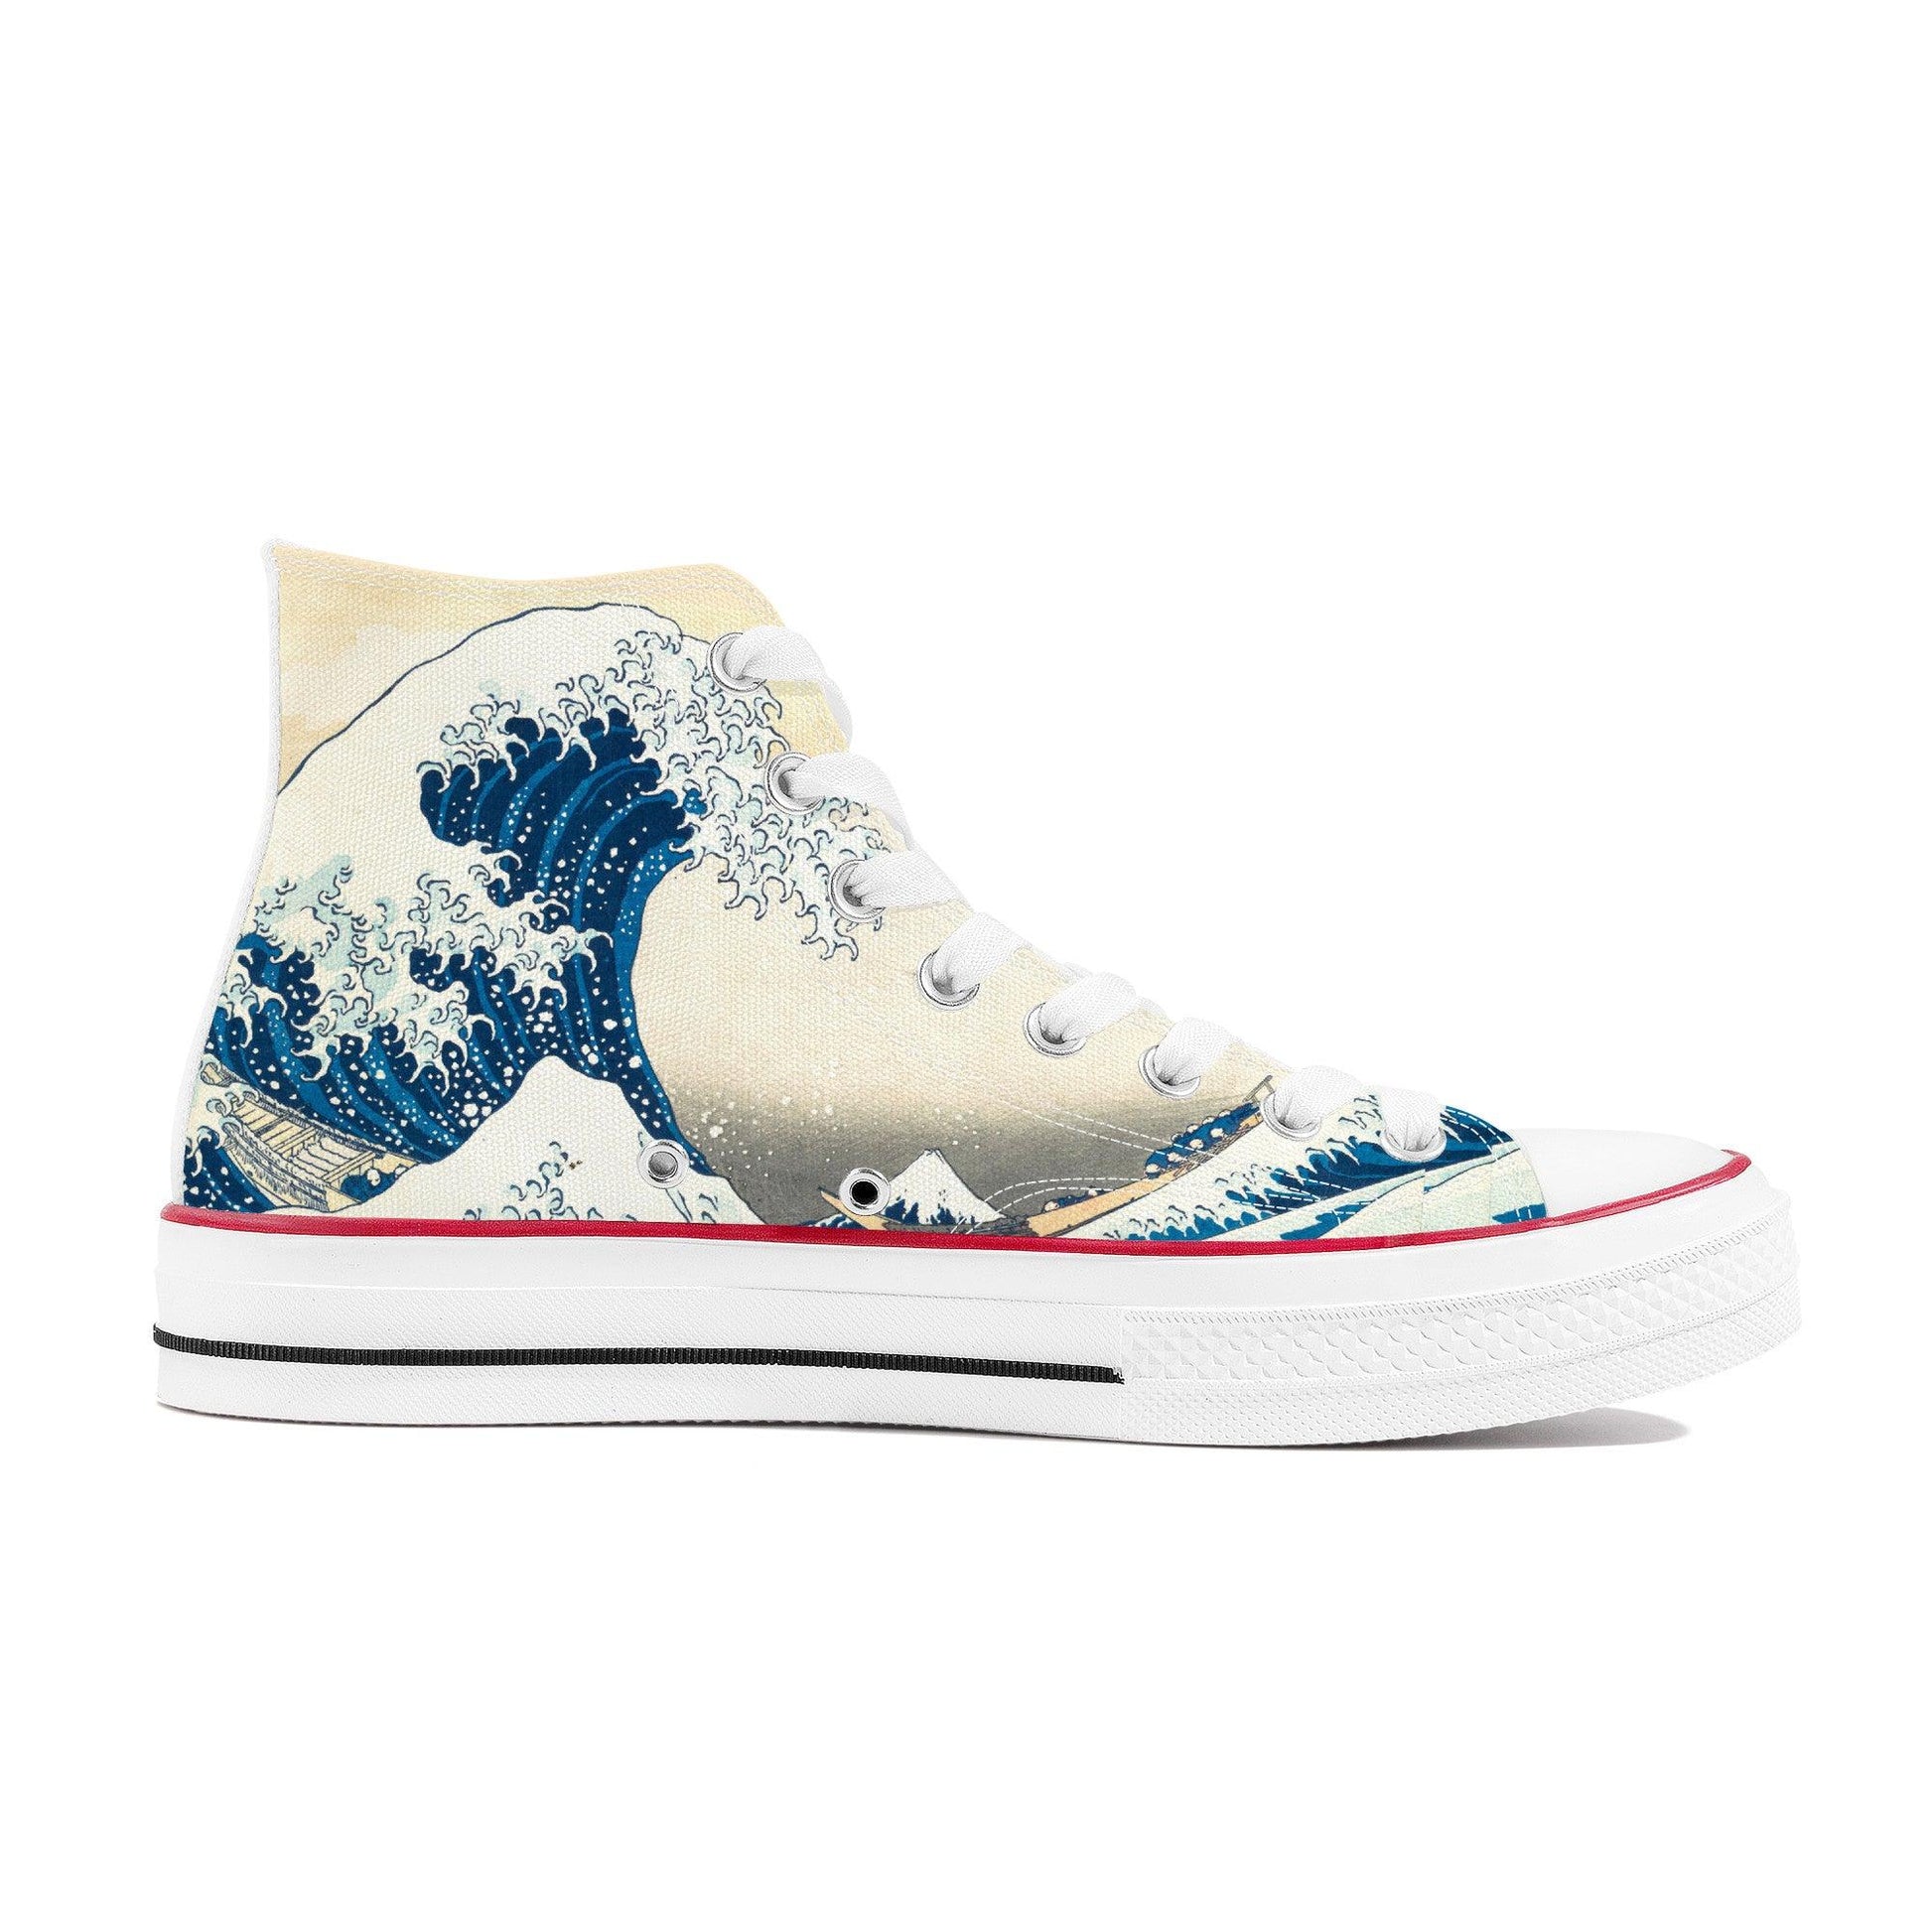 The Great Wave  High Top Canvas Shoes - Kaito Japan Design 